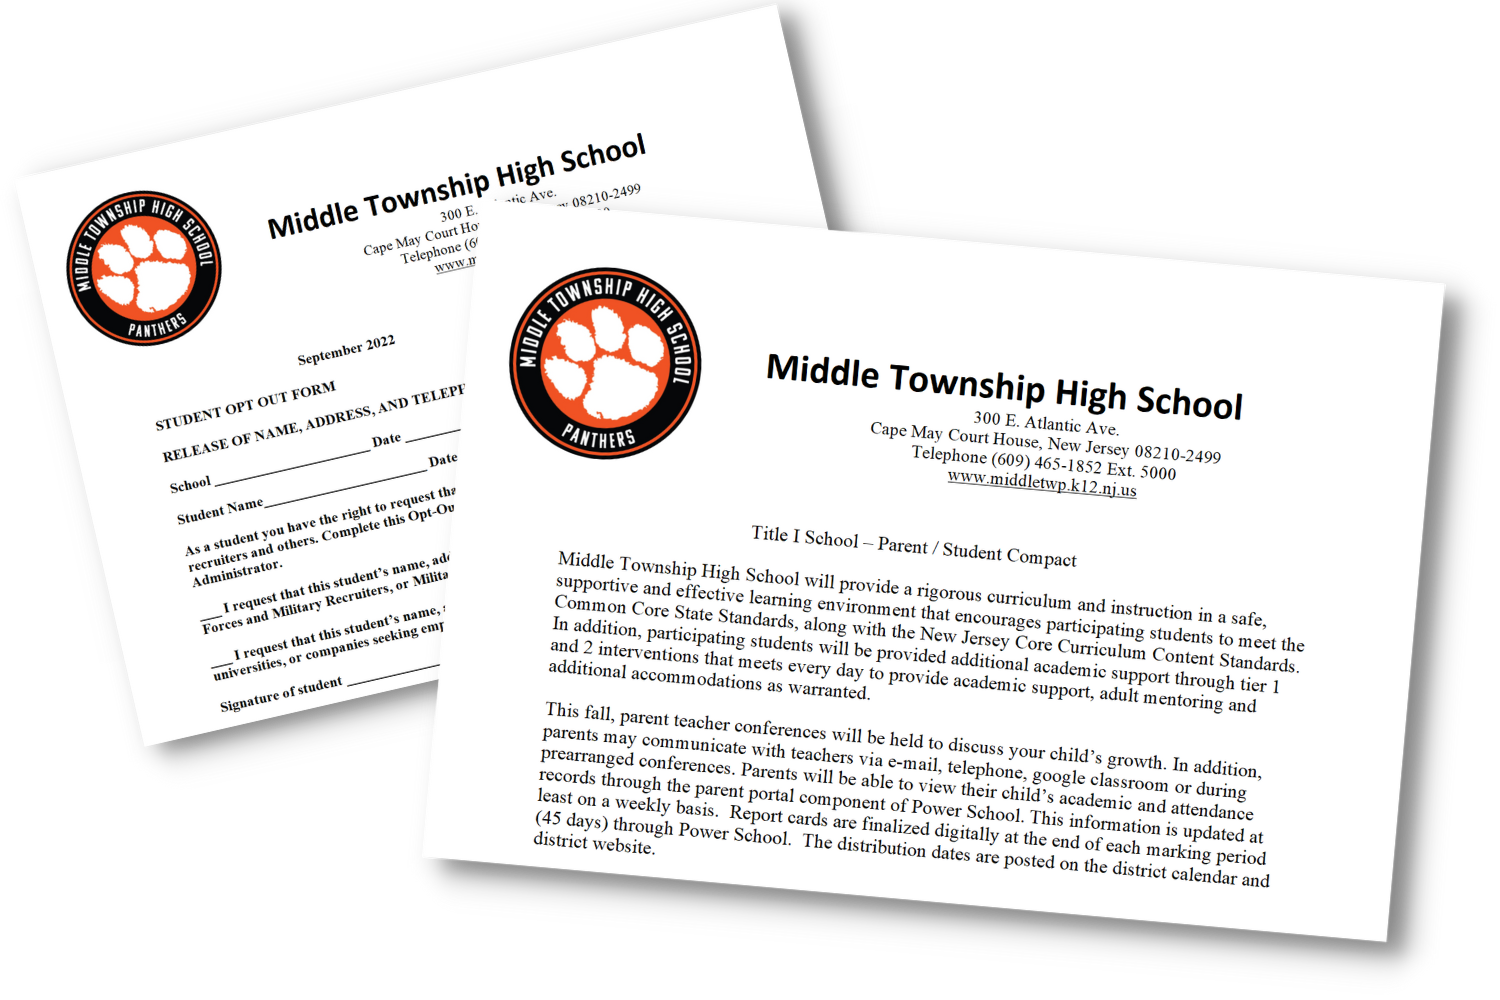 MIDDLE TOWNSHIP HIGH SCHOOL FORMS GRAPHIC